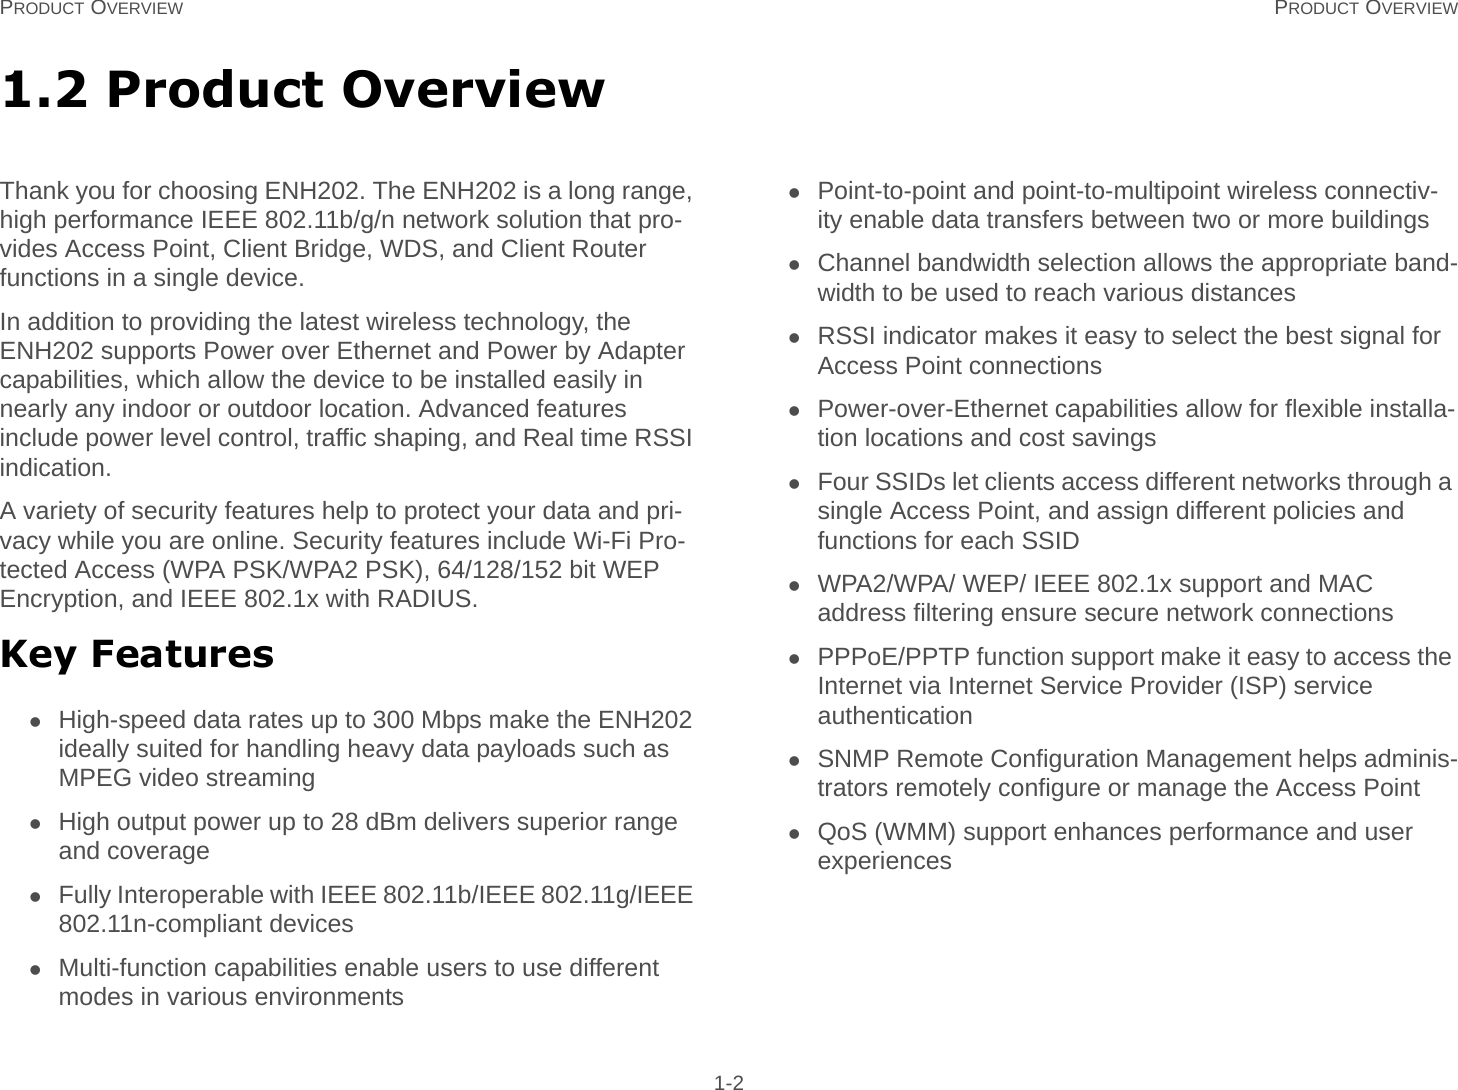 PRODUCT OVERVIEW PRODUCT OVERVIEW 1-21.2 Product OverviewThank you for choosing ENH202. The ENH202 is a long range, high performance IEEE 802.11b/g/n network solution that pro-vides Access Point, Client Bridge, WDS, and Client Router functions in a single device.In addition to providing the latest wireless technology, the ENH202 supports Power over Ethernet and Power by Adapter capabilities, which allow the device to be installed easily in nearly any indoor or outdoor location. Advanced features include power level control, traffic shaping, and Real time RSSI indication.A variety of security features help to protect your data and pri-vacy while you are online. Security features include Wi-Fi Pro-tected Access (WPA PSK/WPA2 PSK), 64/128/152 bit WEP Encryption, and IEEE 802.1x with RADIUS.Key FeaturesHigh-speed data rates up to 300 Mbps make the ENH202 ideally suited for handling heavy data payloads such as MPEG video streamingHigh output power up to 28 dBm delivers superior range and coverageFully Interoperable with IEEE 802.11b/IEEE 802.11g/IEEE 802.11n-compliant devicesMulti-function capabilities enable users to use different modes in various environmentsPoint-to-point and point-to-multipoint wireless connectiv-ity enable data transfers between two or more buildingsChannel bandwidth selection allows the appropriate band-width to be used to reach various distancesRSSI indicator makes it easy to select the best signal for Access Point connectionsPower-over-Ethernet capabilities allow for flexible installa-tion locations and cost savingsFour SSIDs let clients access different networks through a single Access Point, and assign different policies and functions for each SSIDWPA2/WPA/ WEP/ IEEE 802.1x support and MAC address filtering ensure secure network connectionsPPPoE/PPTP function support make it easy to access the Internet via Internet Service Provider (ISP) service authenticationSNMP Remote Configuration Management helps adminis-trators remotely configure or manage the Access PointQoS (WMM) support enhances performance and user experiences